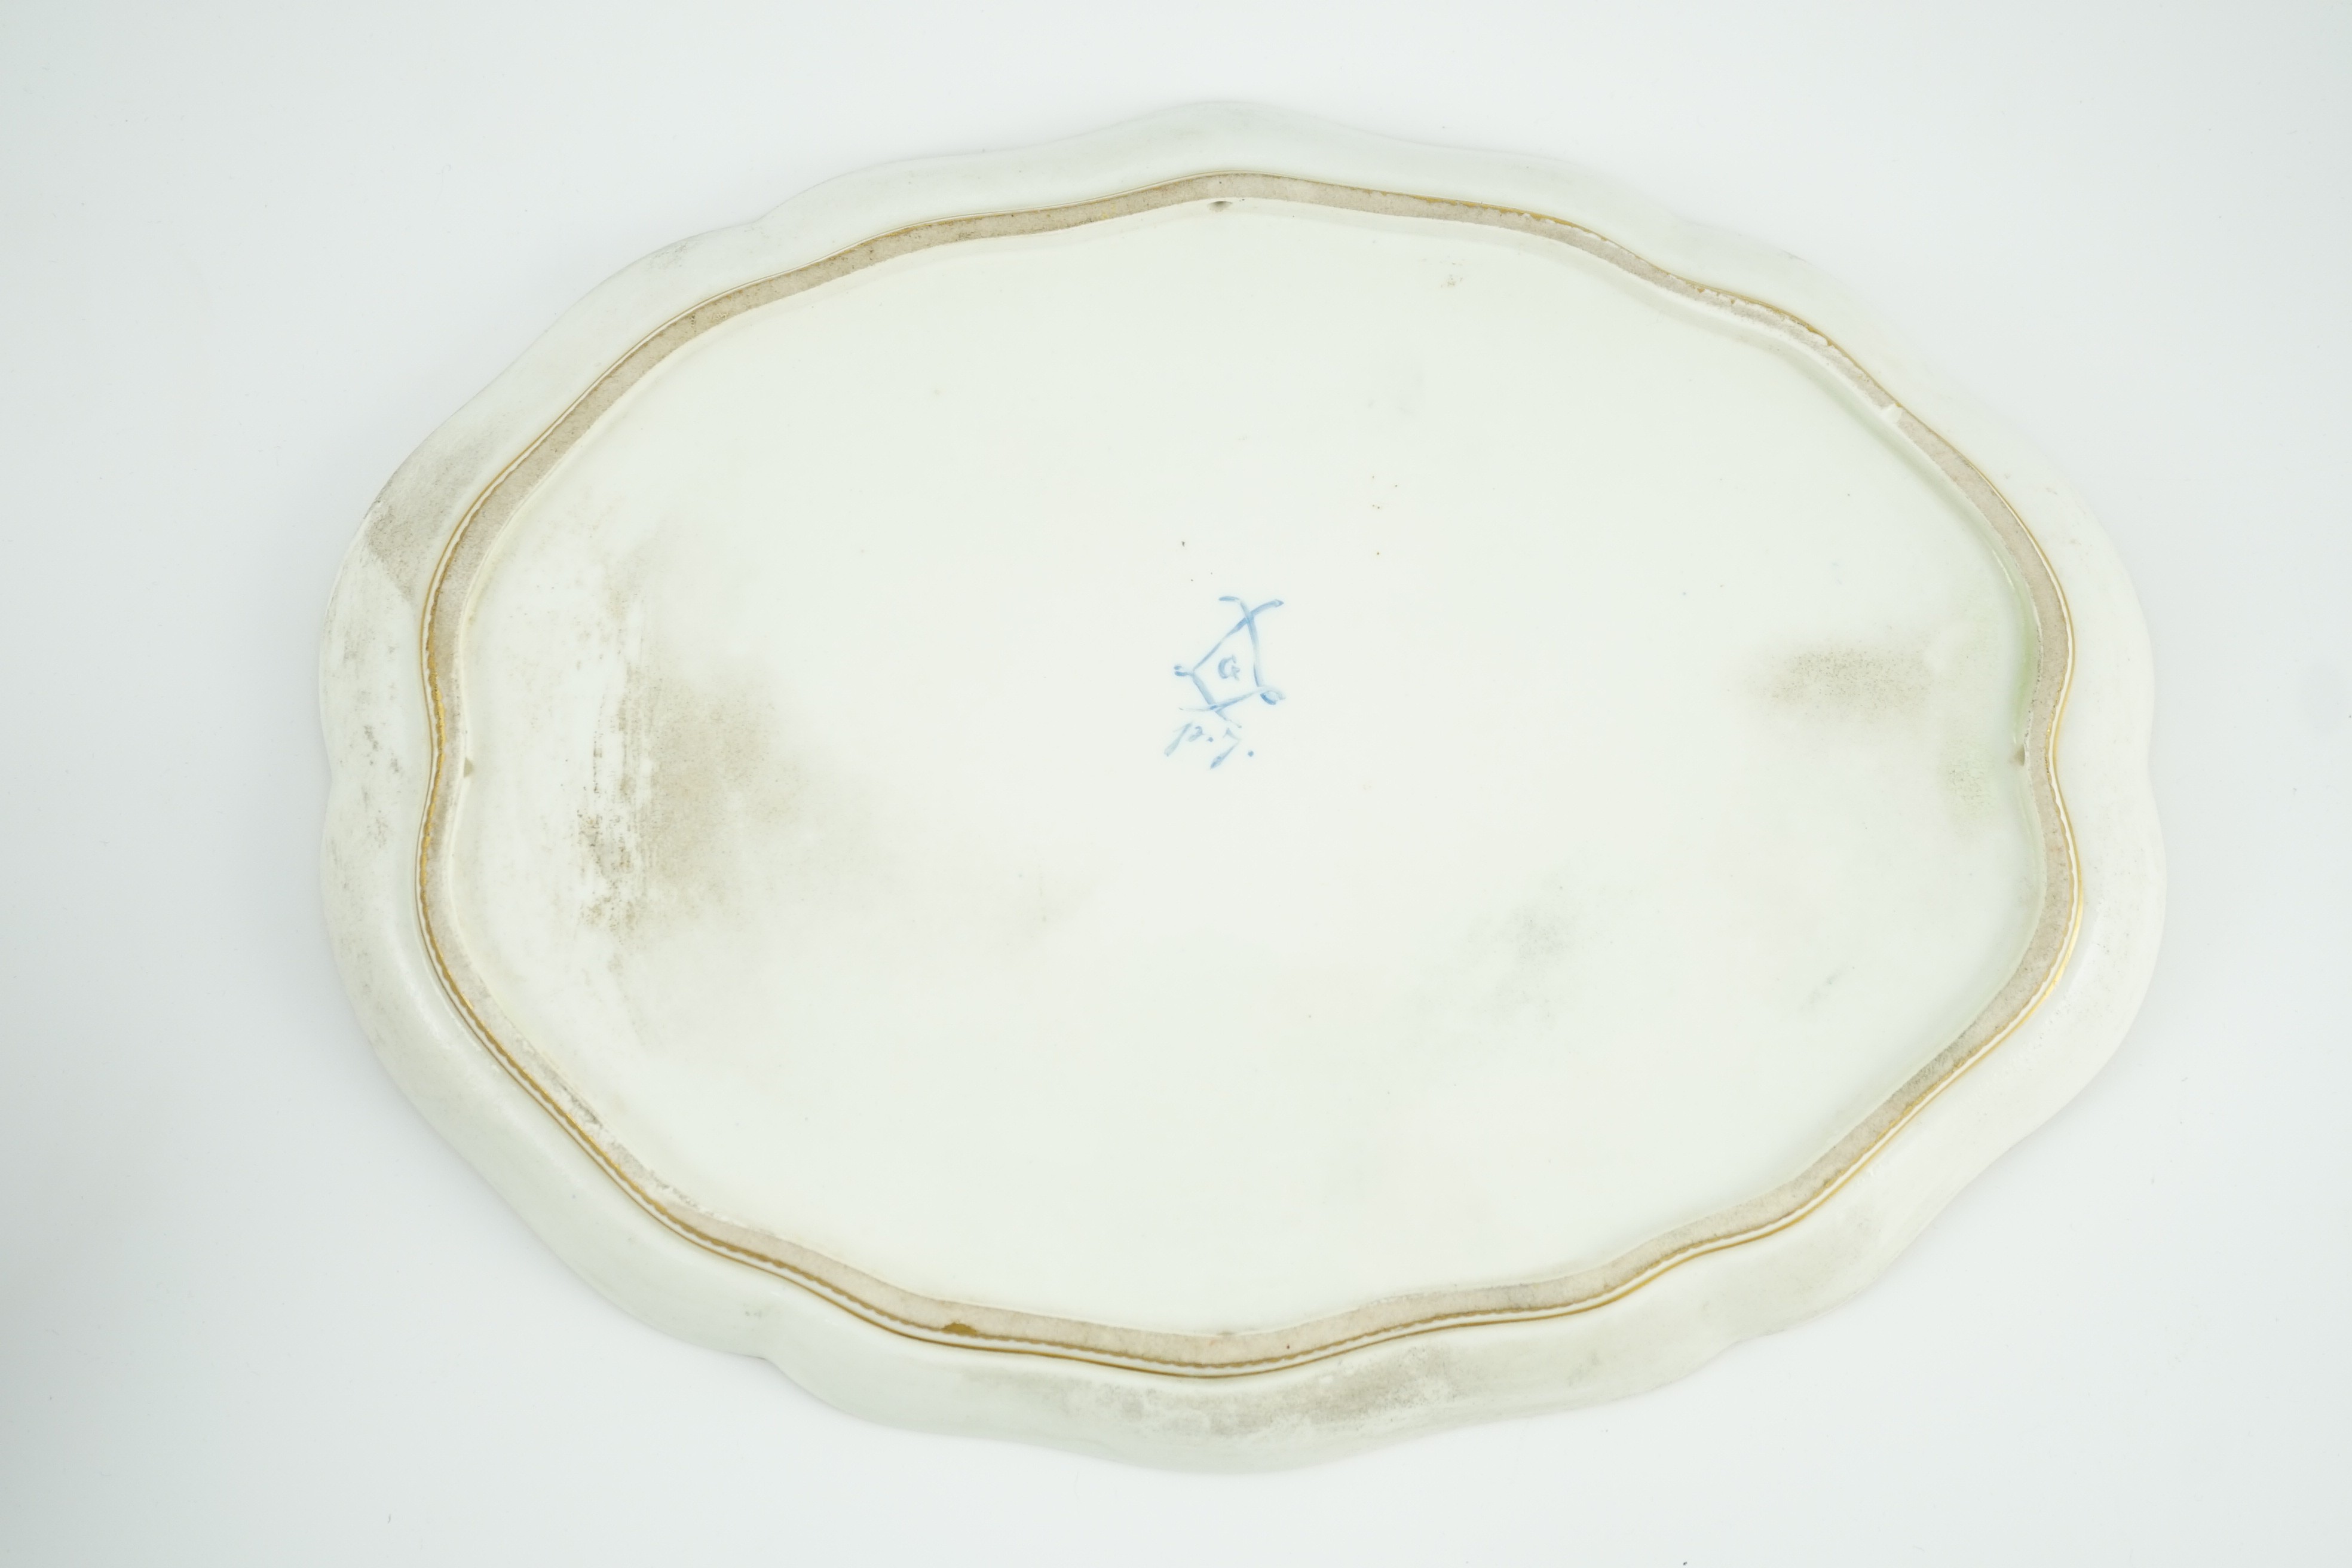 A Sevres porcelain shaped oval tray, date code for 1754, 33.5cm wide